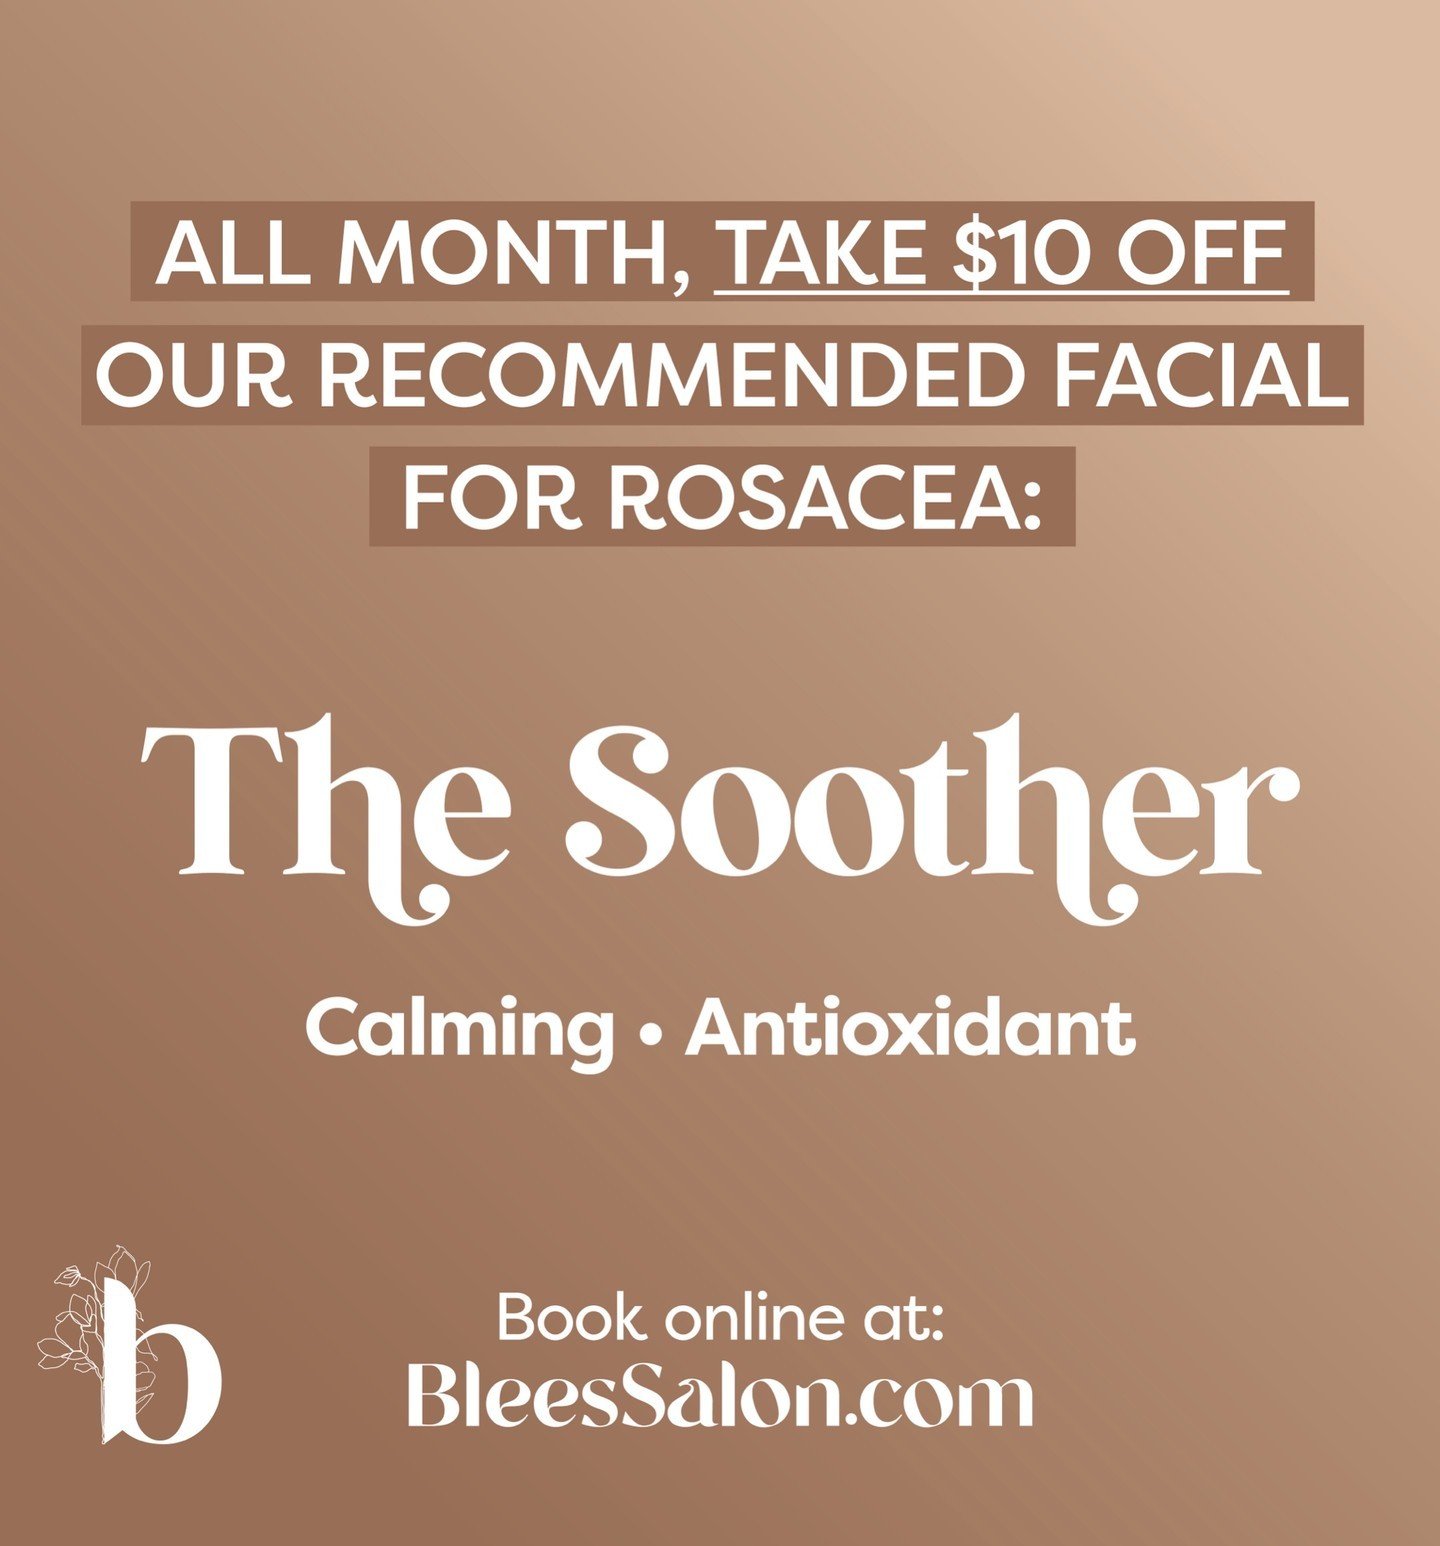 One more week to take advantage of a discount on The Soother Facial! This is a great calming facial for those with rosacea or those who just want a relaxing hour without a cell phone! 😌

 #estheticians #licensedesthetician #skincareprofessional #ski